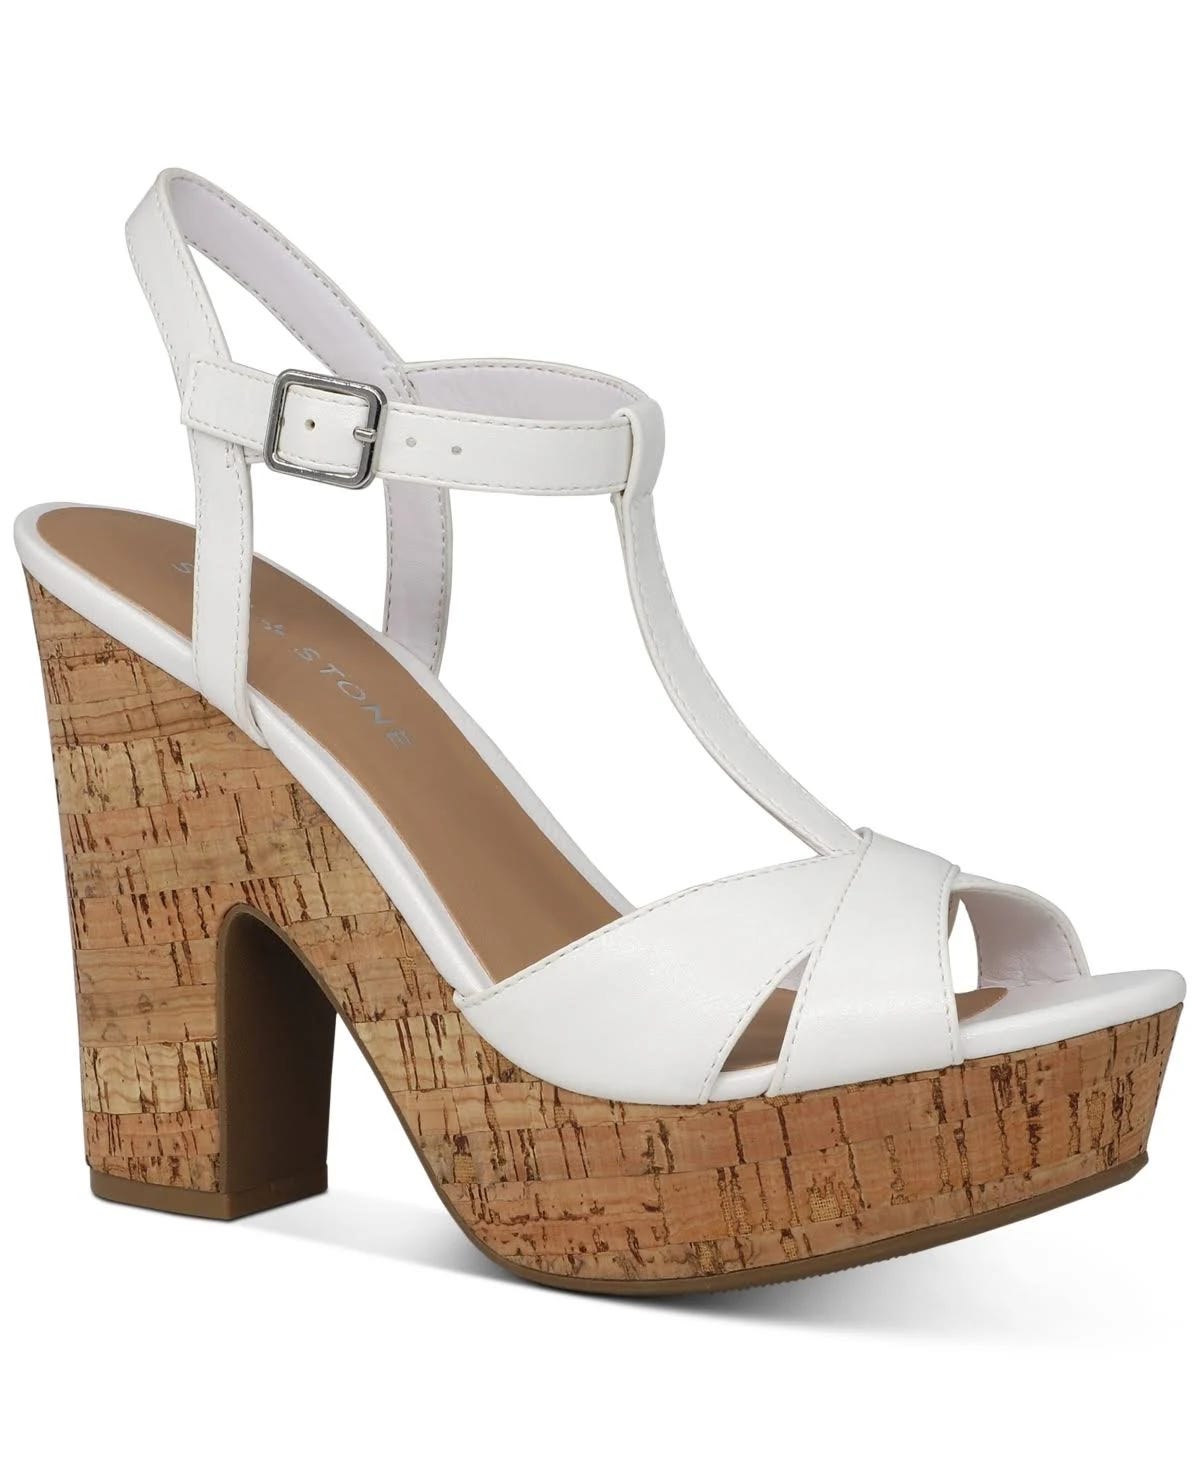 Modern White High Heel Sandals for Dressy Occasions | Image